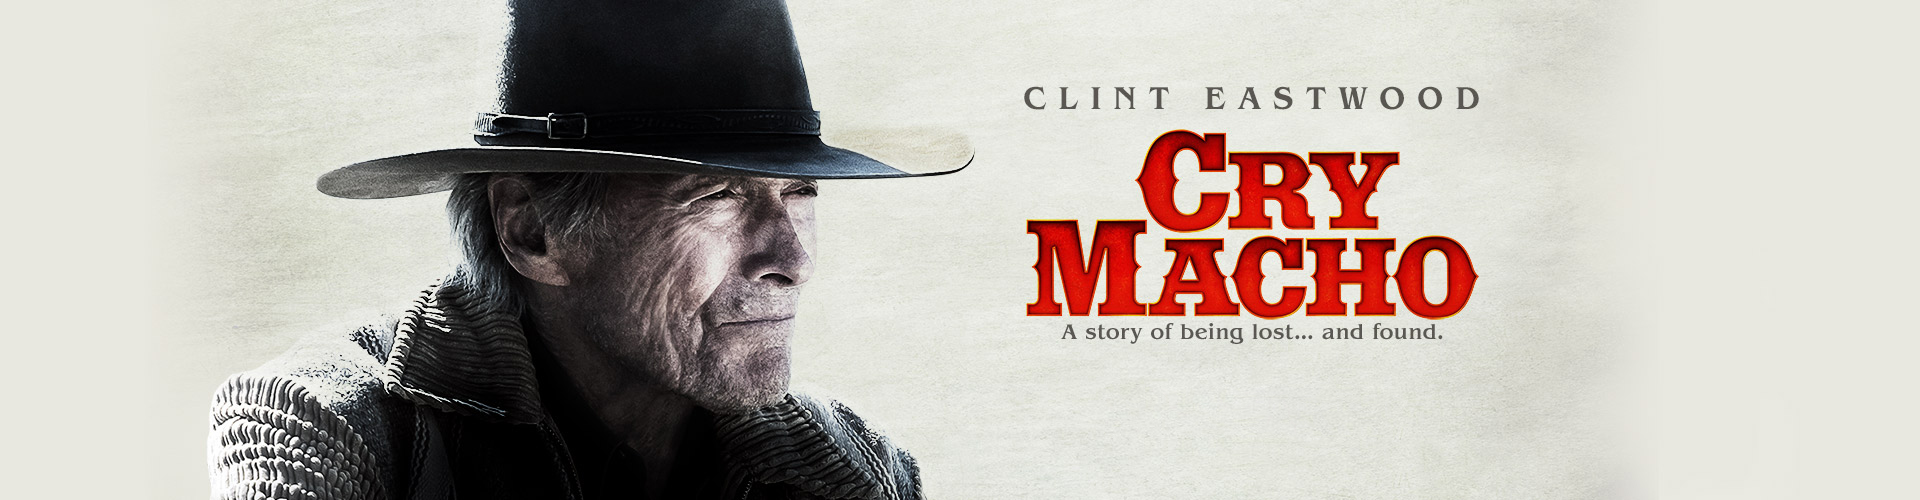 Cry Macho | Official Site - When Does The Movie Cry Macho Come Out